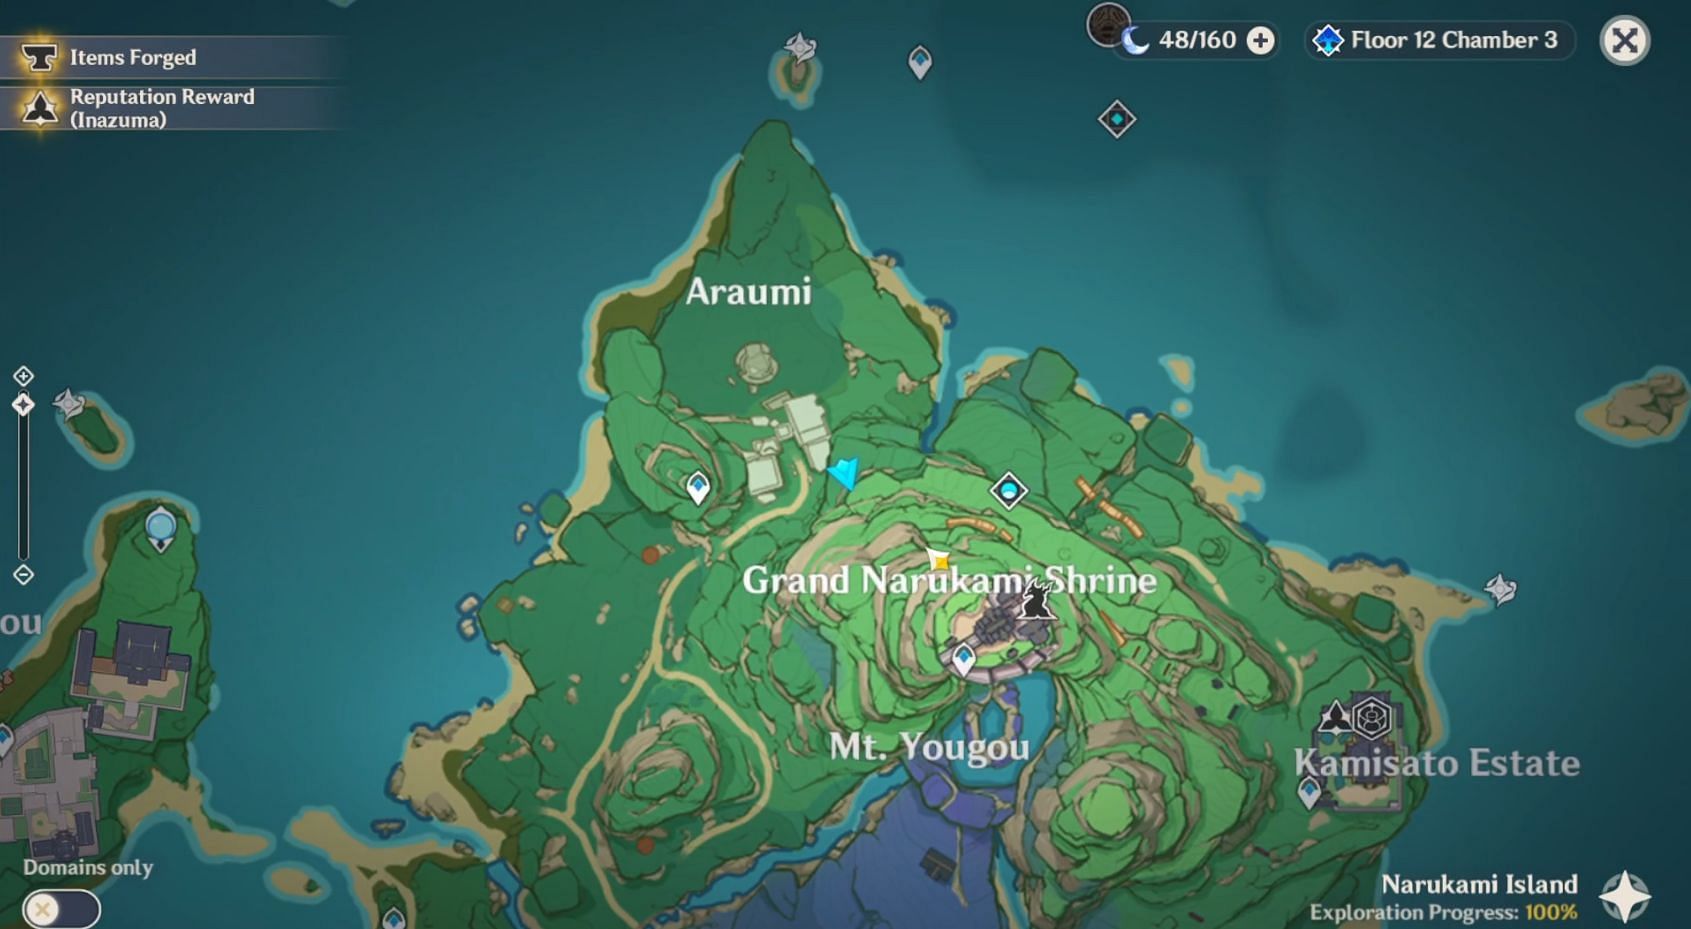 Location of the note on the map (Image via Genshin Impact)